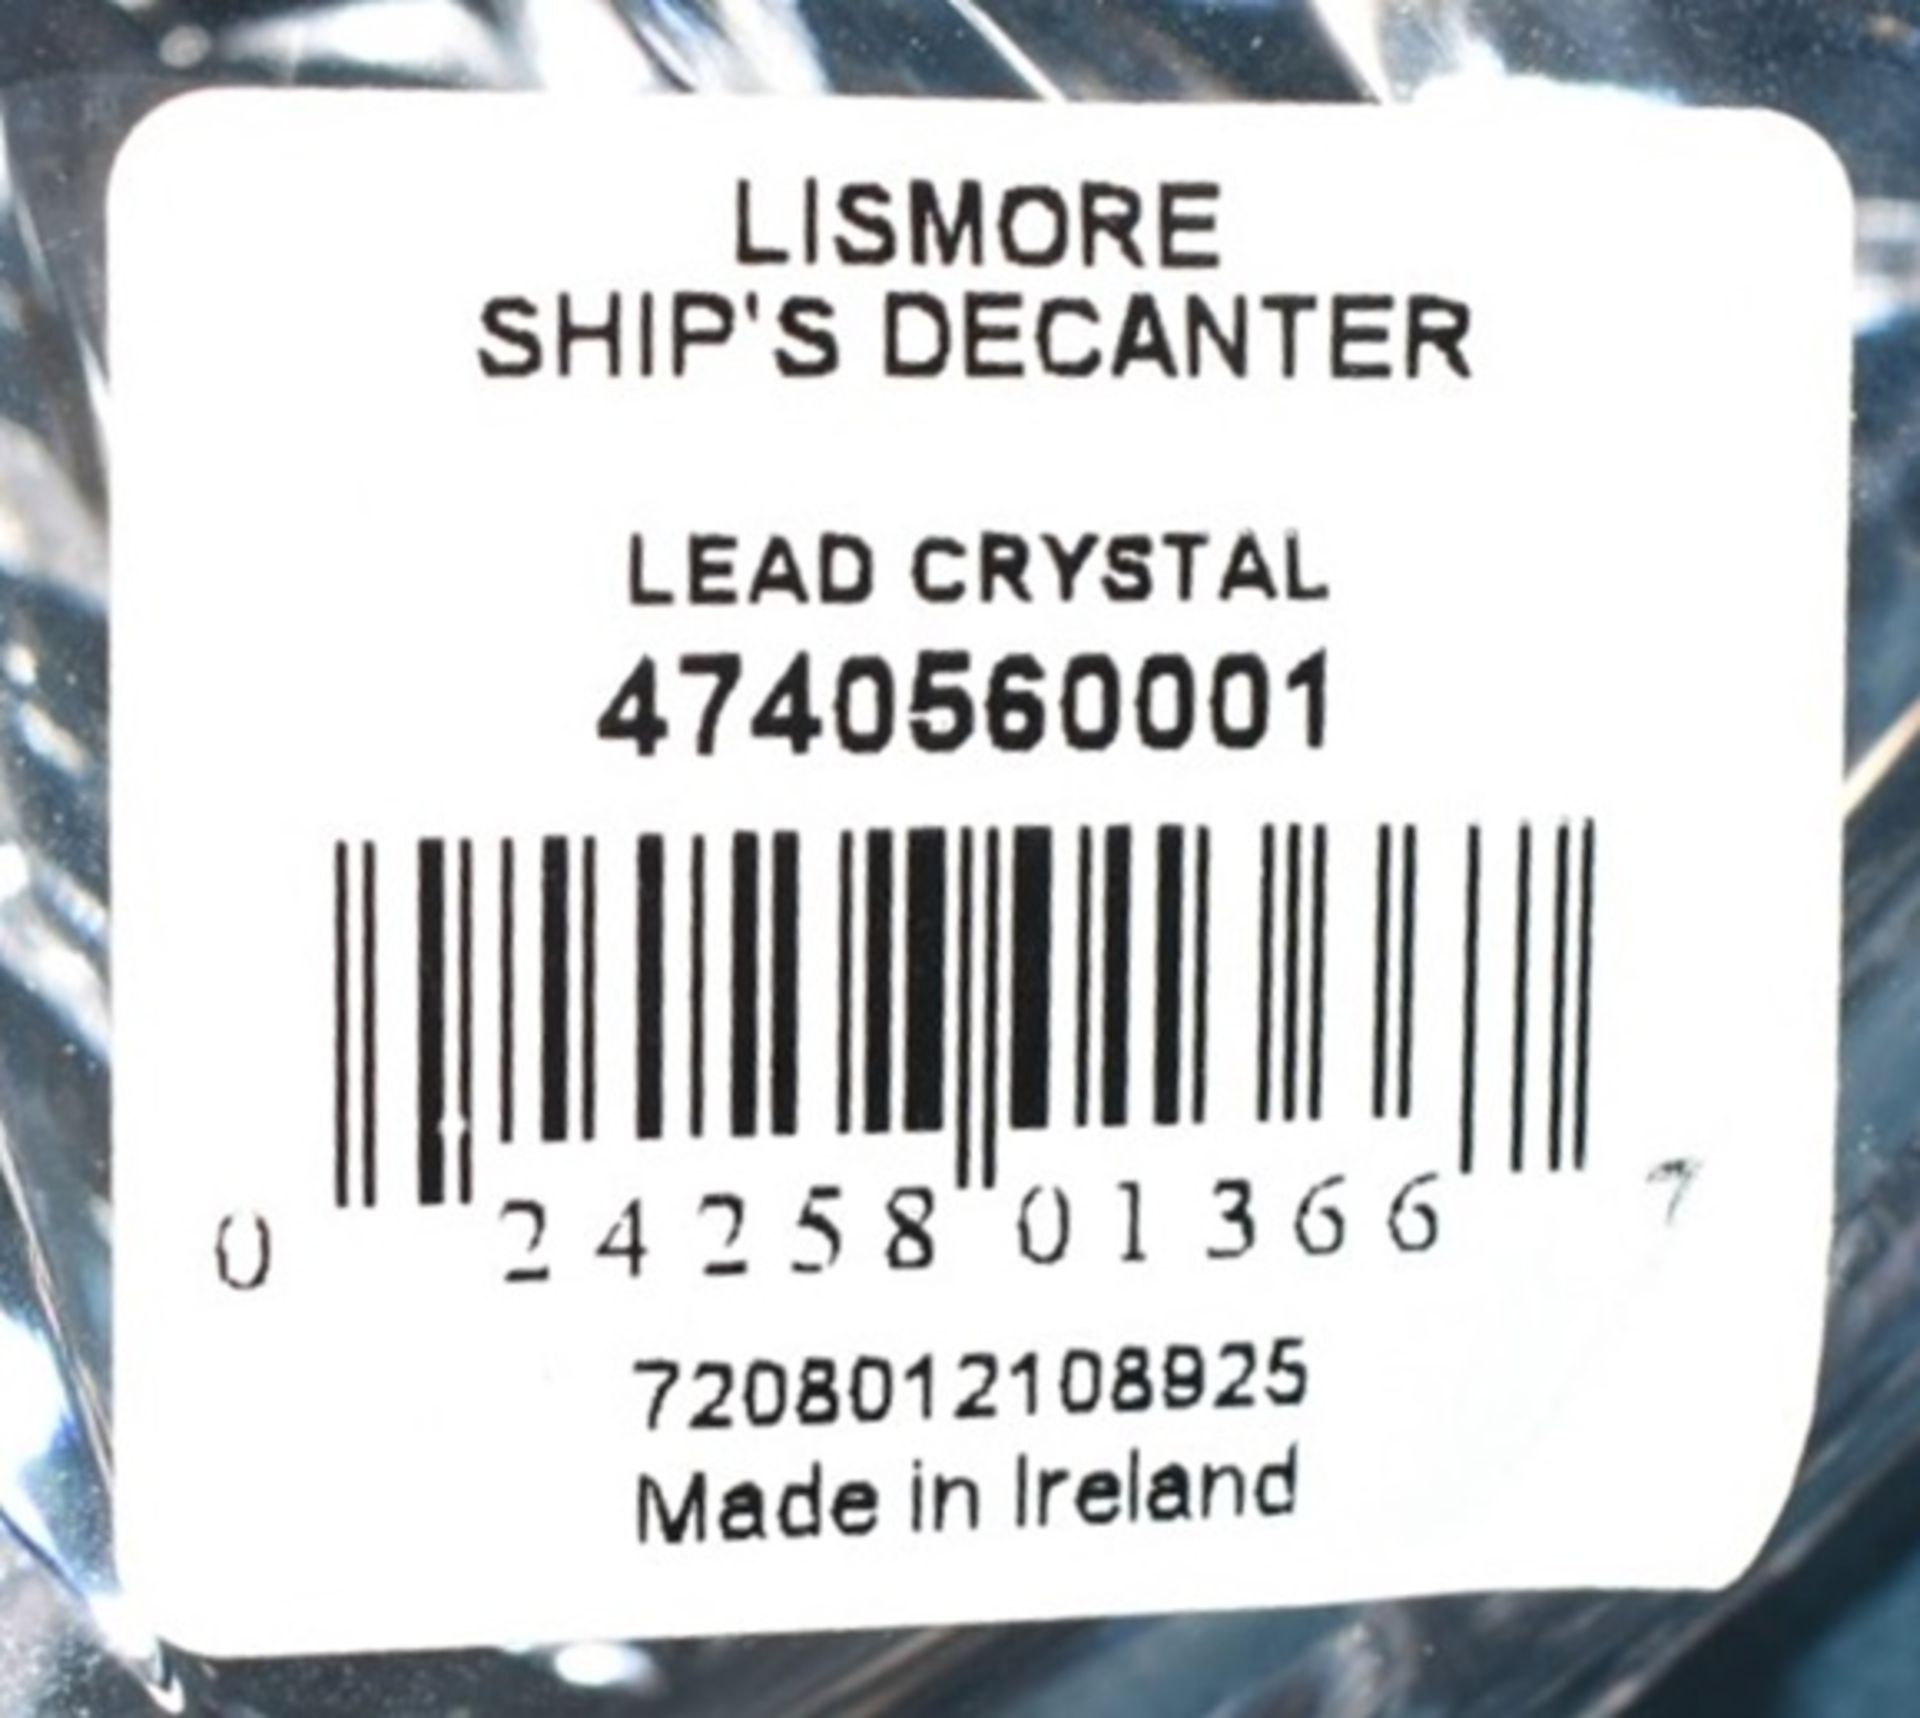 1 x WATERFORD 'Lismore' Lead Crystal Ships Decanter (850ml) - Original Price £450.00 - Boxed - Image 4 of 9